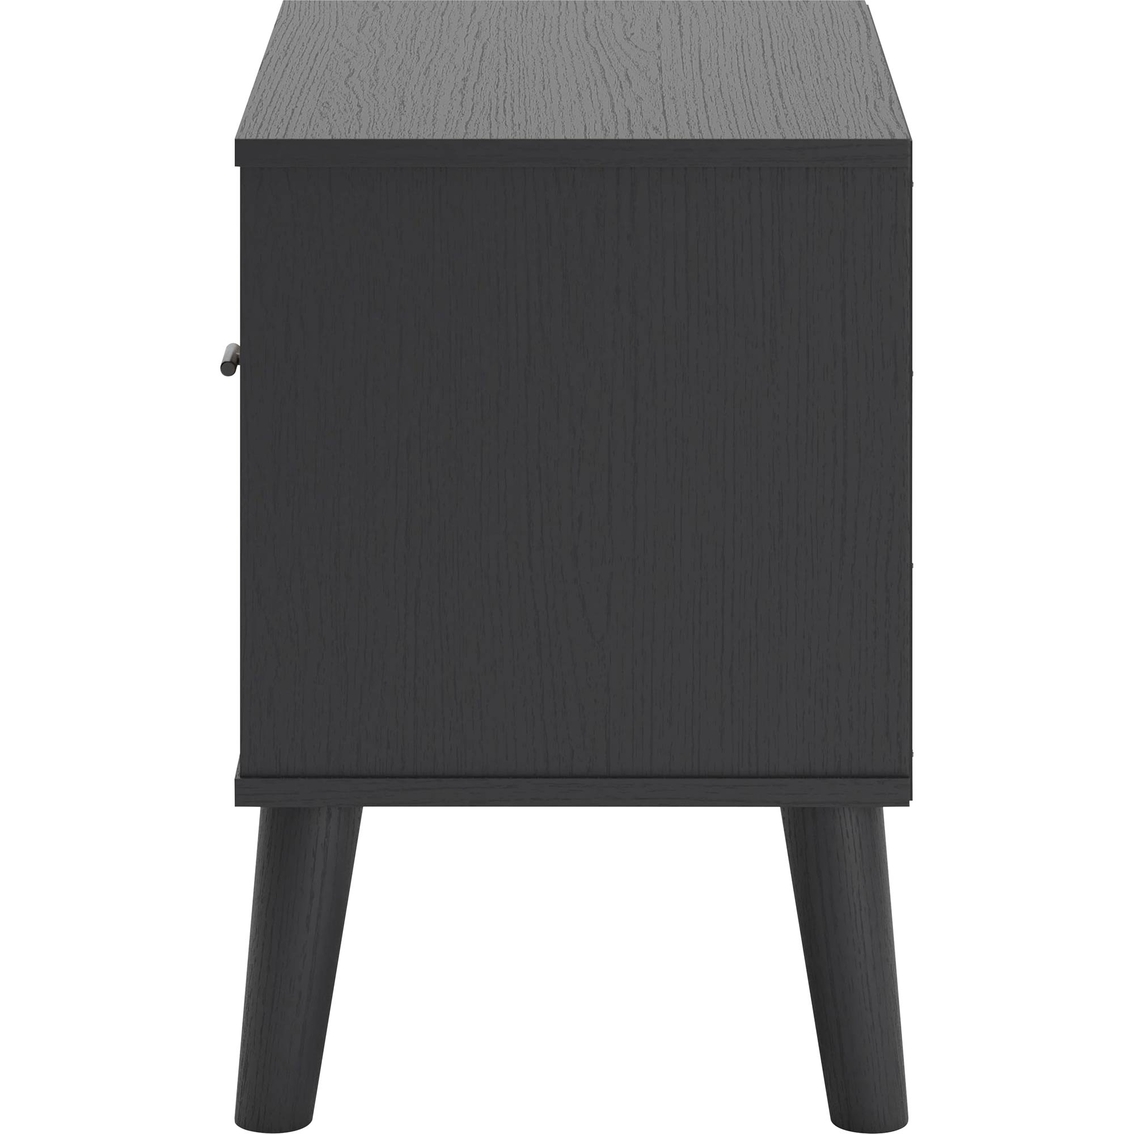 Signature Design by Ashley Charlang Ready to Assemble Nightstand - Image 3 of 5